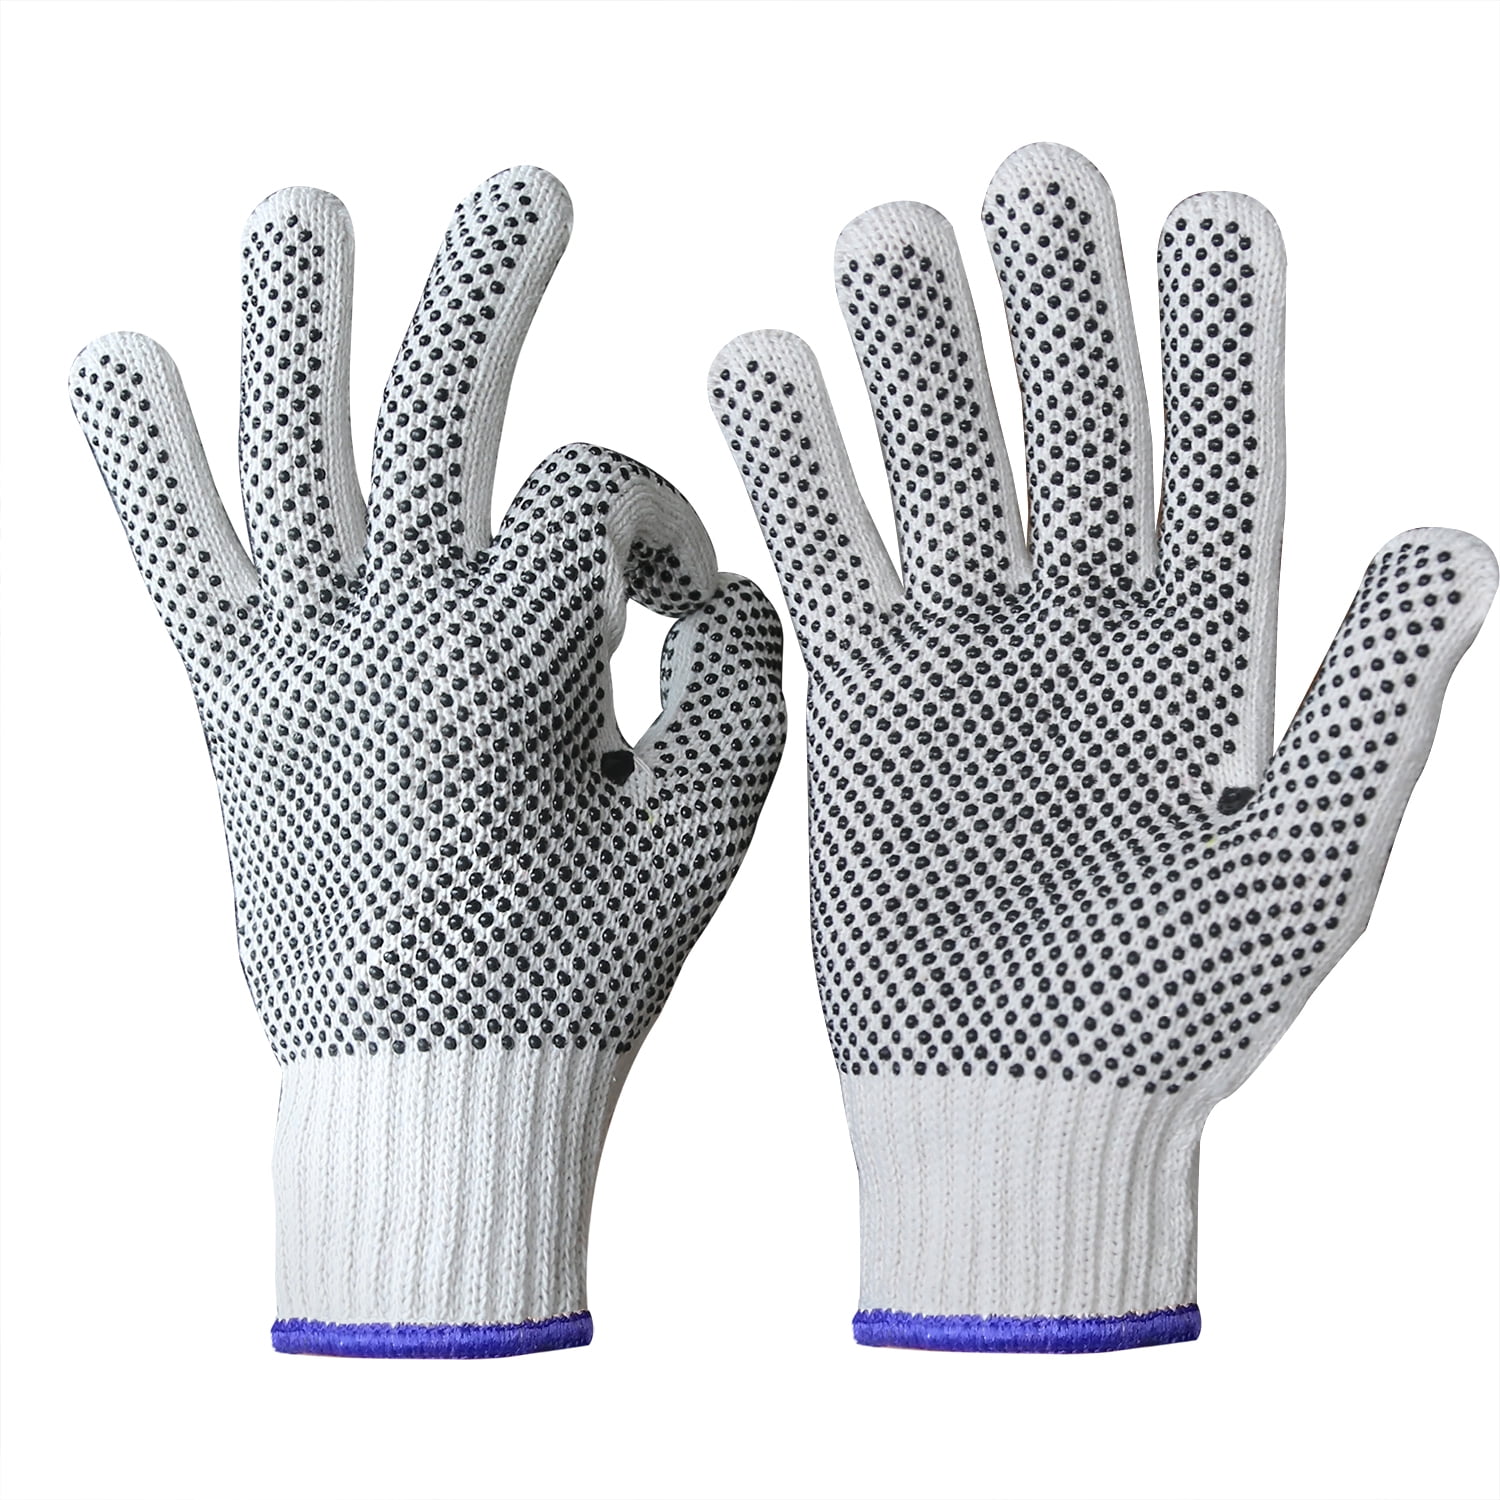 Details about   Industrial Work Gloves One Pair Size Small 70% PVC 30% Cotton RN 78747 NEW 